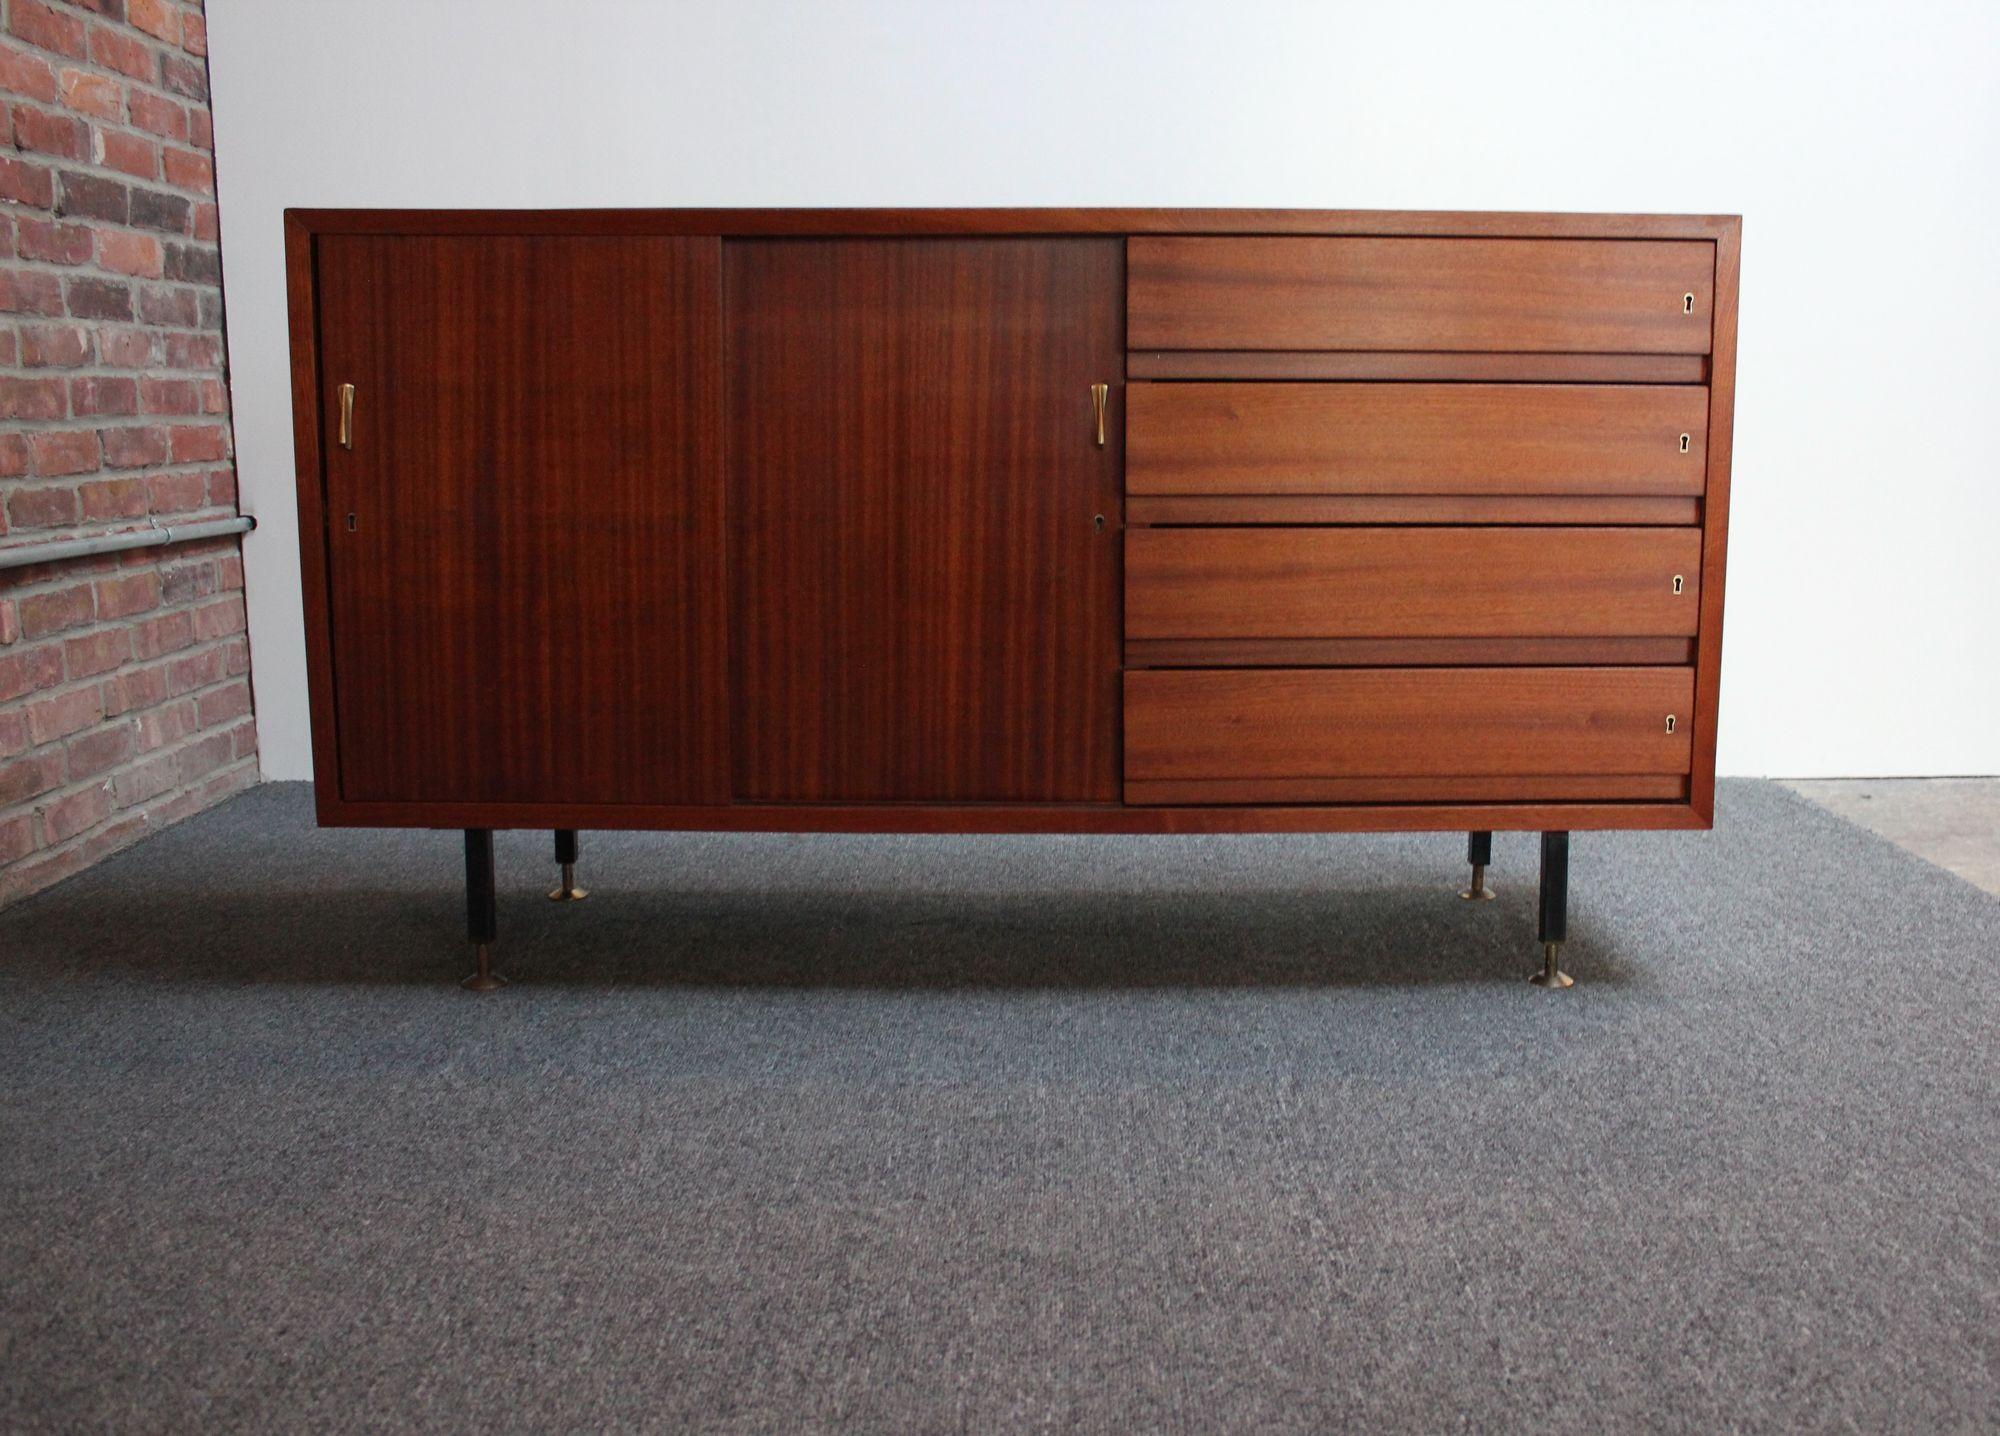 Vintage Italian credenza in mahogany with sky blue laminate surface, sculpted brass pulls, and adjustable brass feet (ca. 1960s, Italy). 
Composed of four locking drawers and two sliding doors that open to reveal open storage flanked by a single